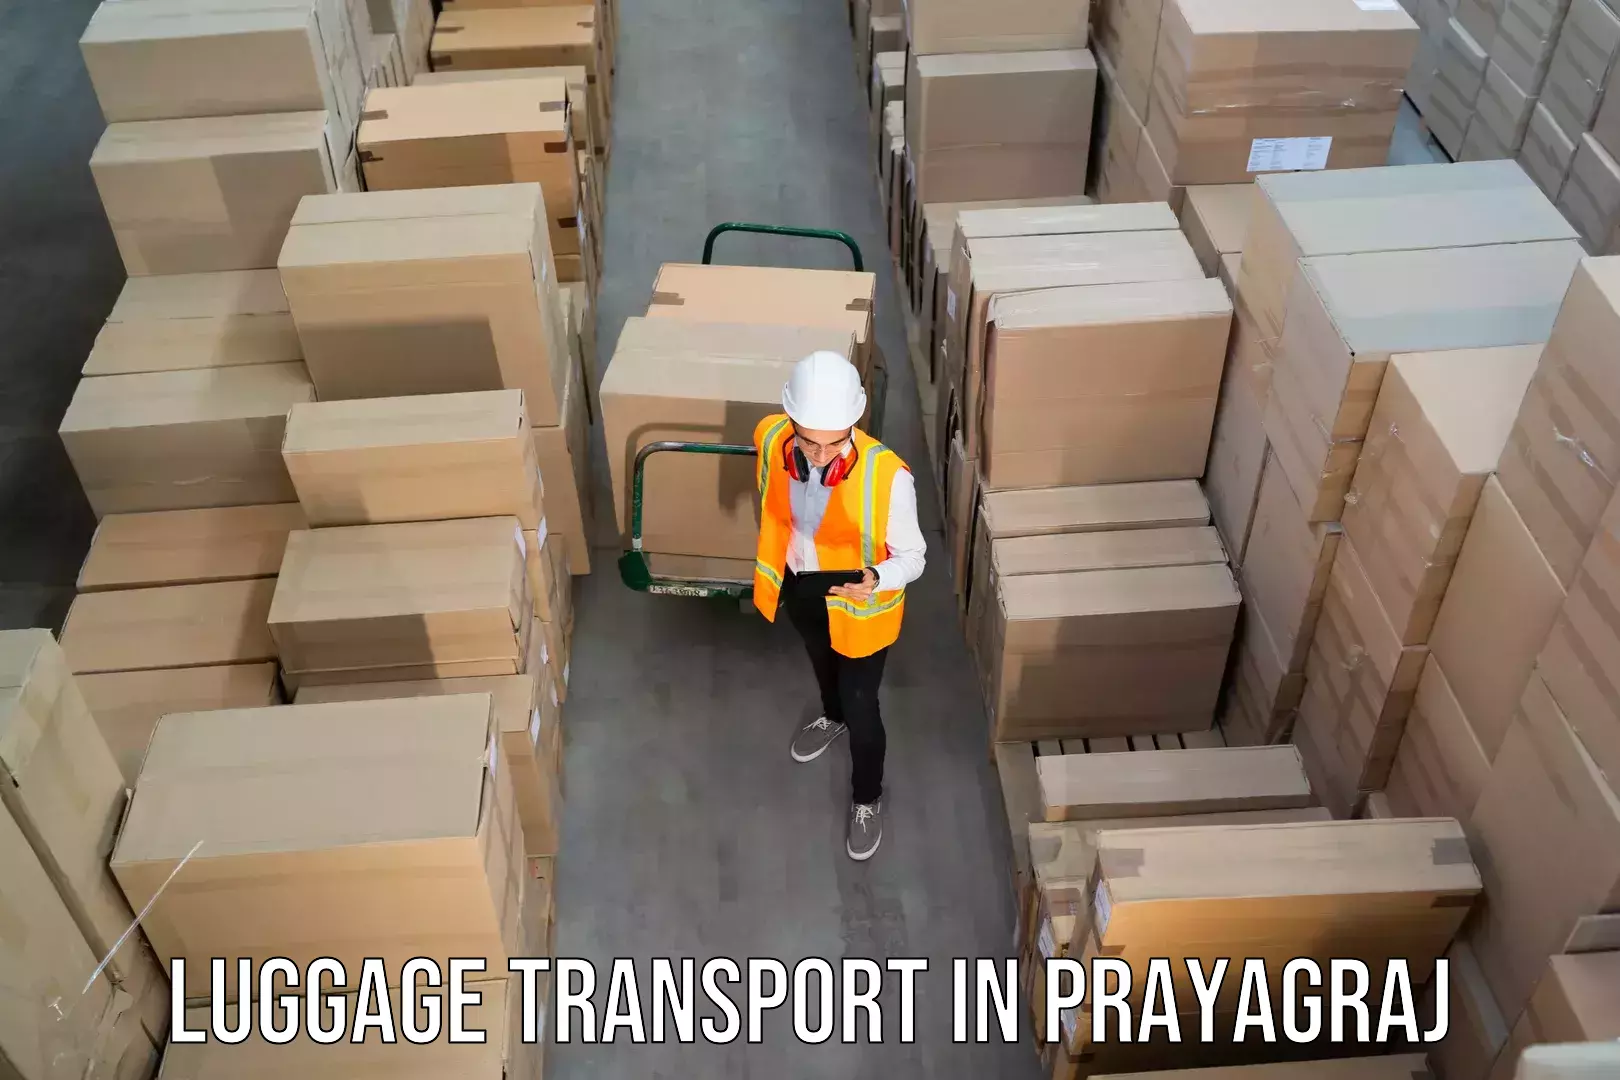 Luggage delivery operations in Prayagraj